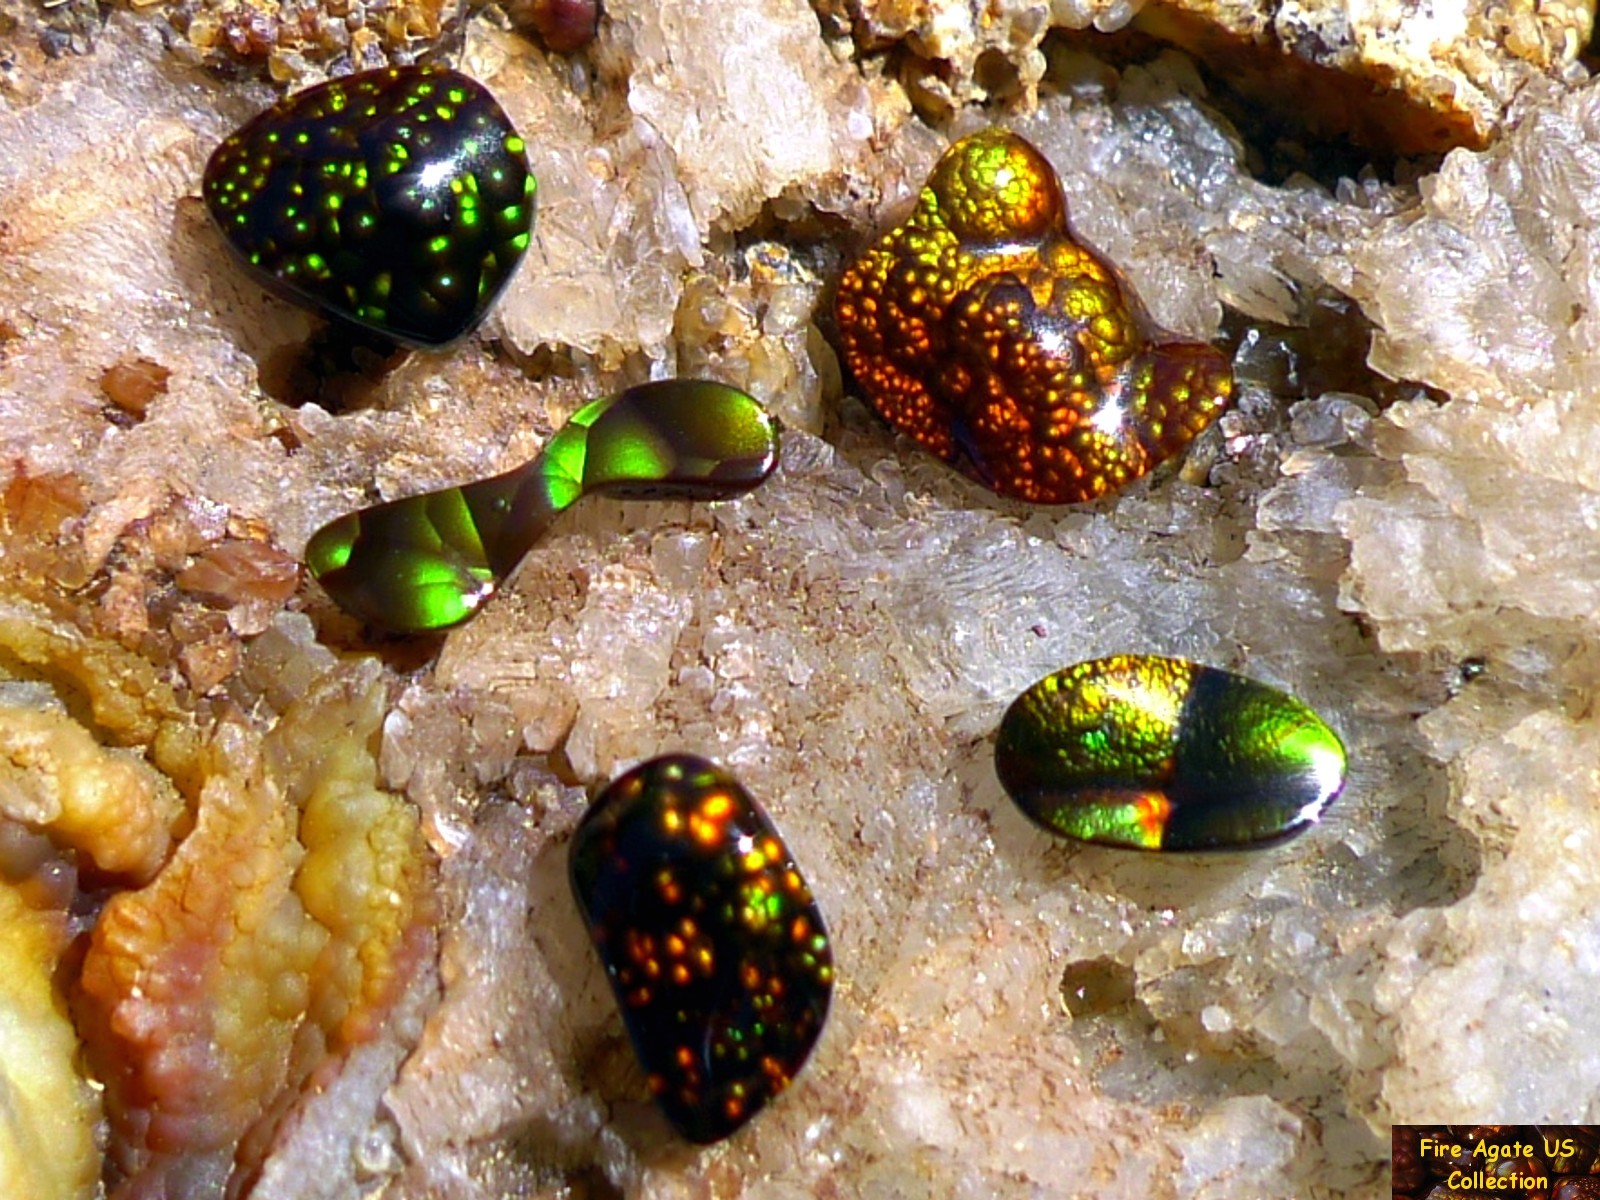 Group of Five Fire Agate Cabochons 4.6 Total Carat Weight Deer Creek Slaughter Mountain Arizona Gems SLG068 Photo 1